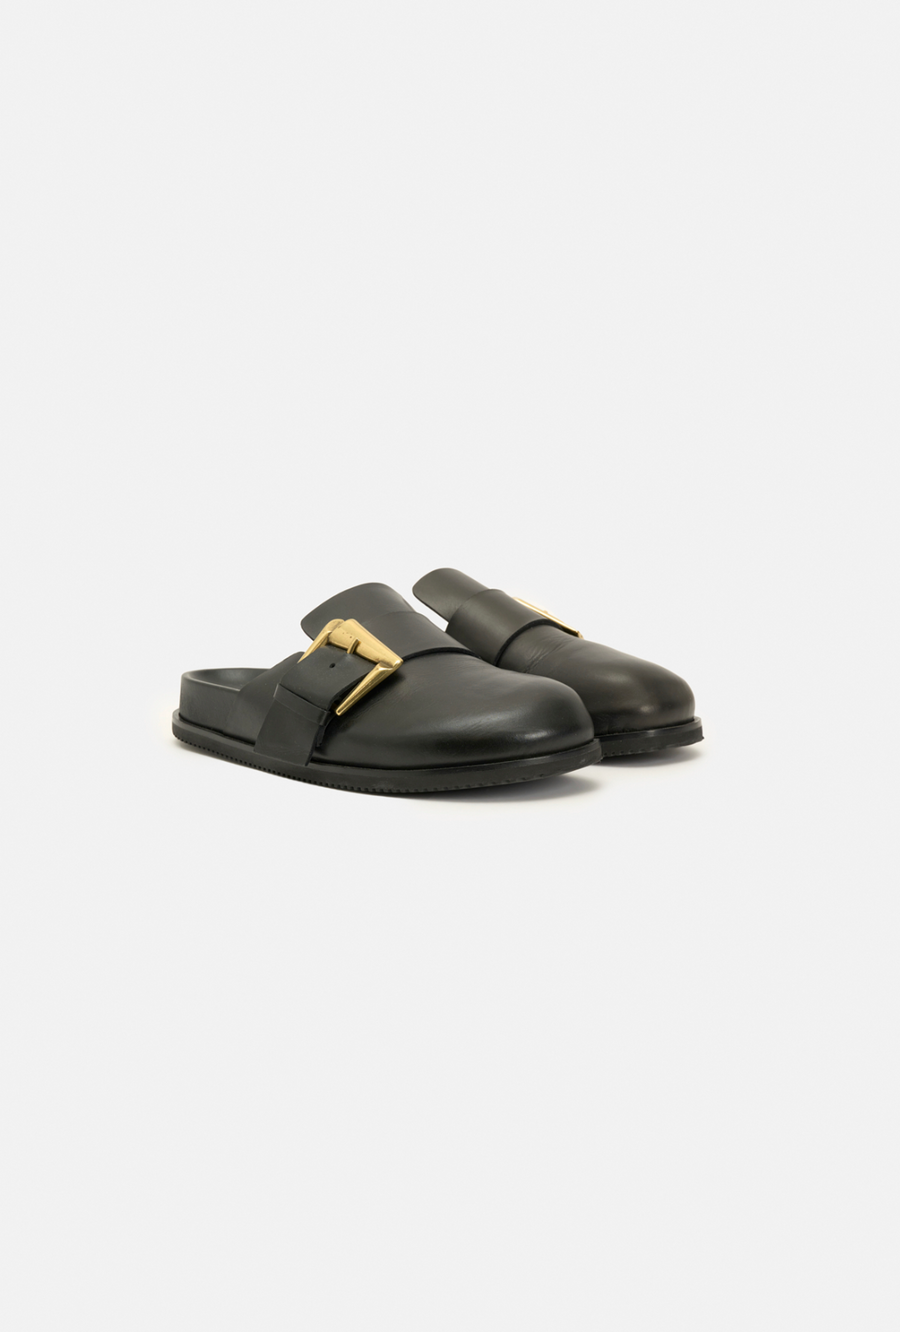 Black Leather Slipper With Buckle